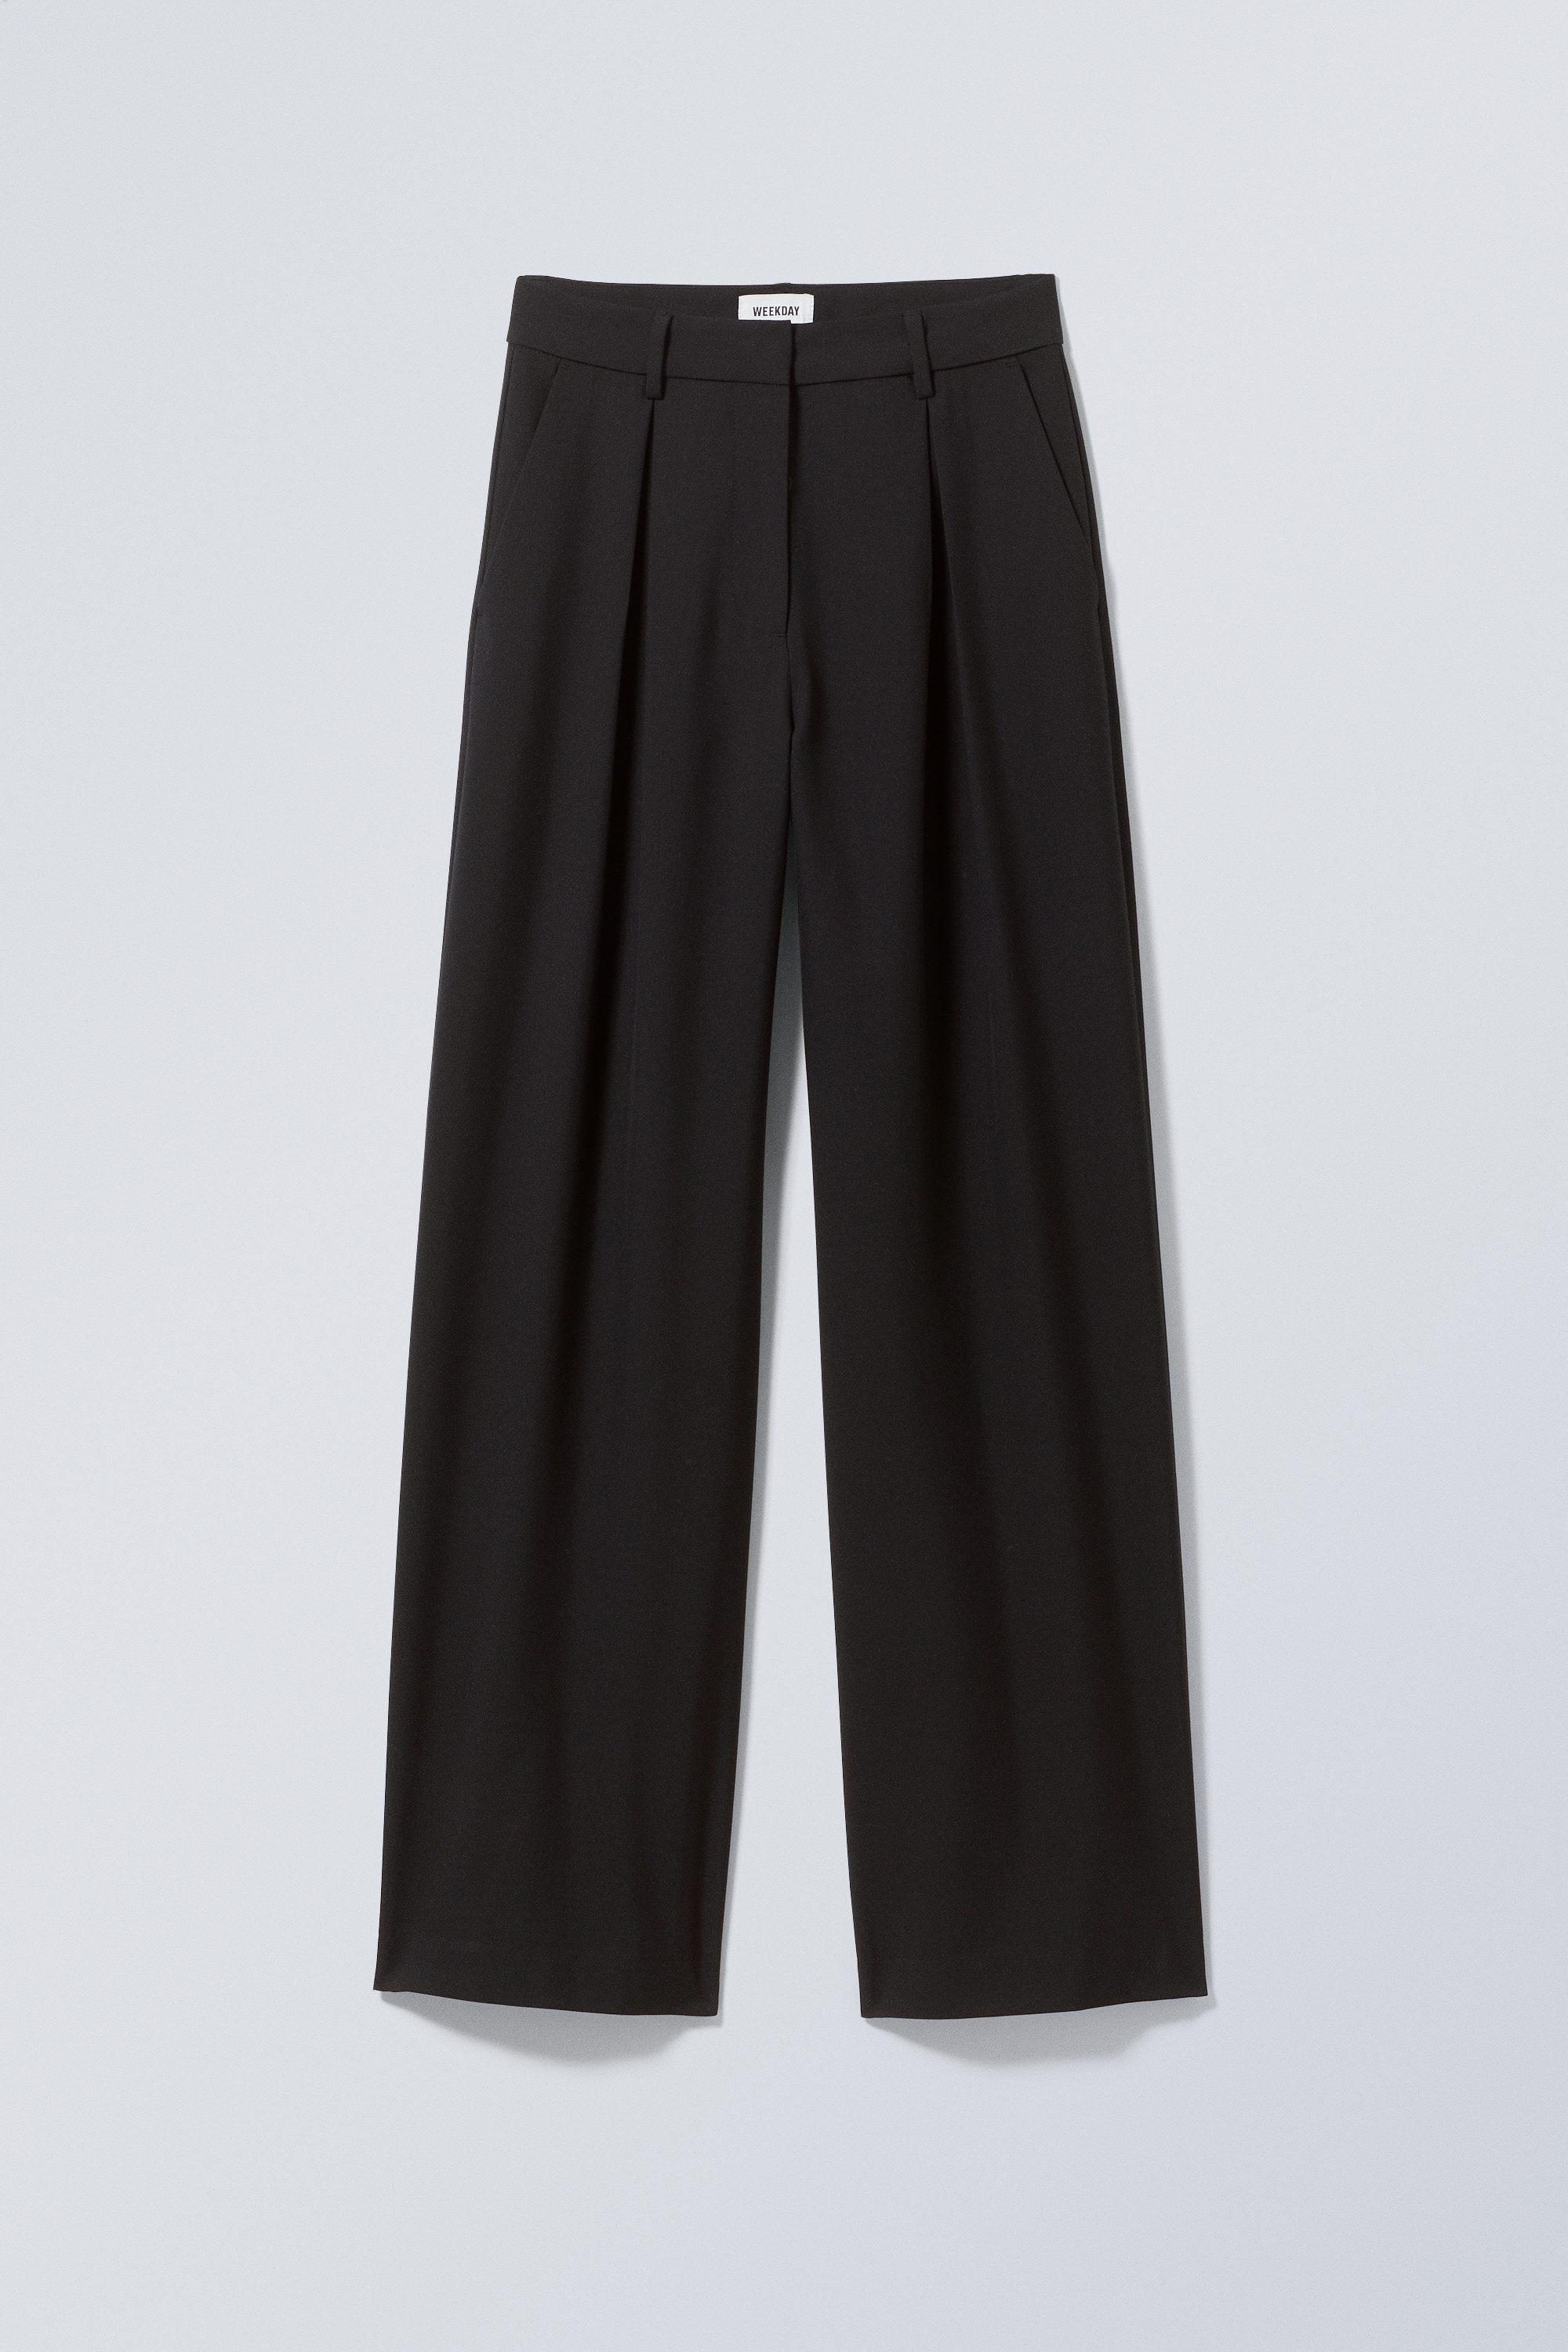 Lilah Tailored Trousers